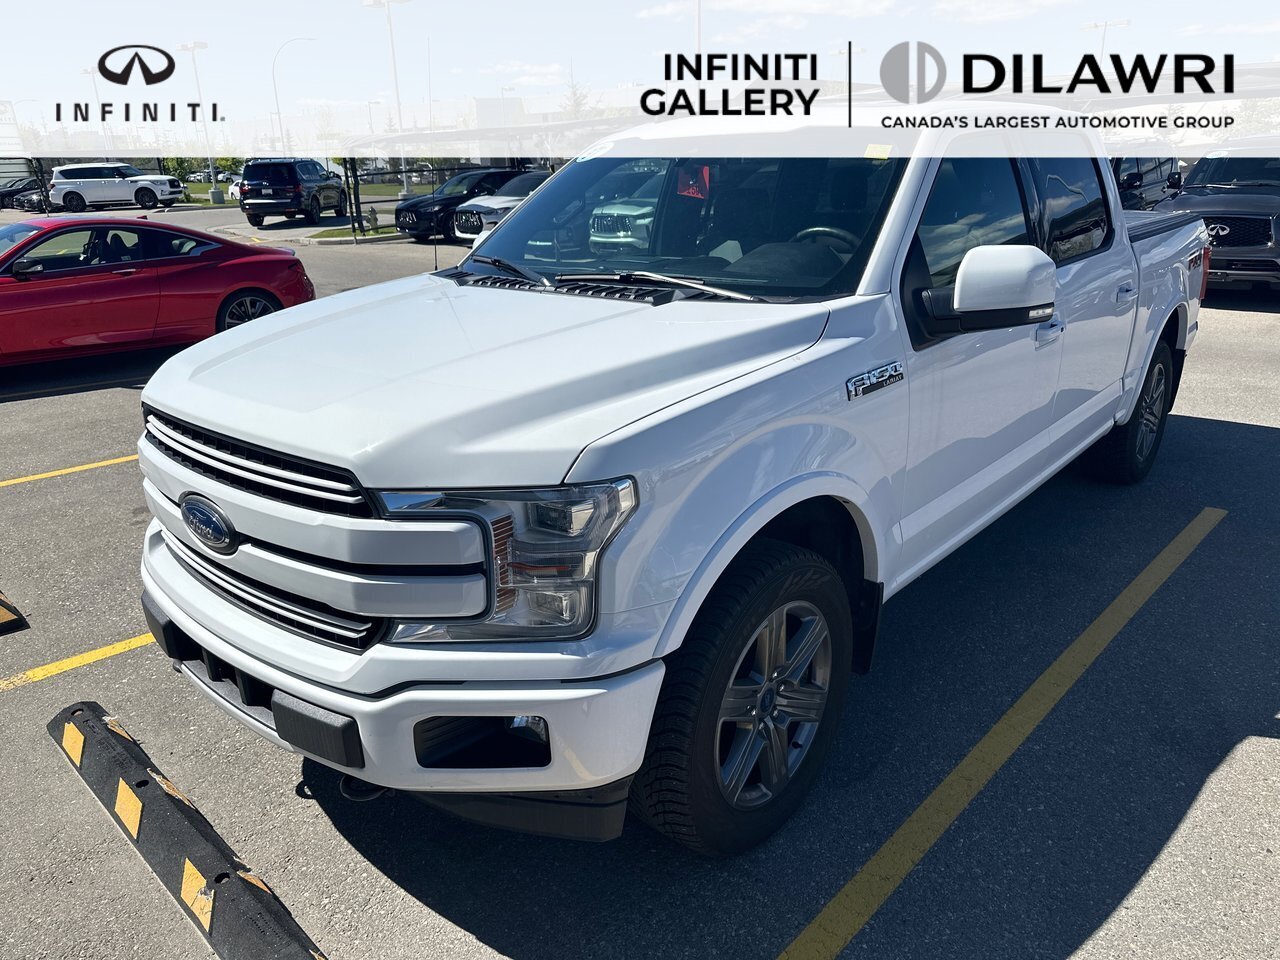 2020 Ford F-150 Lariat 4WD (2.7L|502A|Leather|Nav) ***FRESH ARRIVA